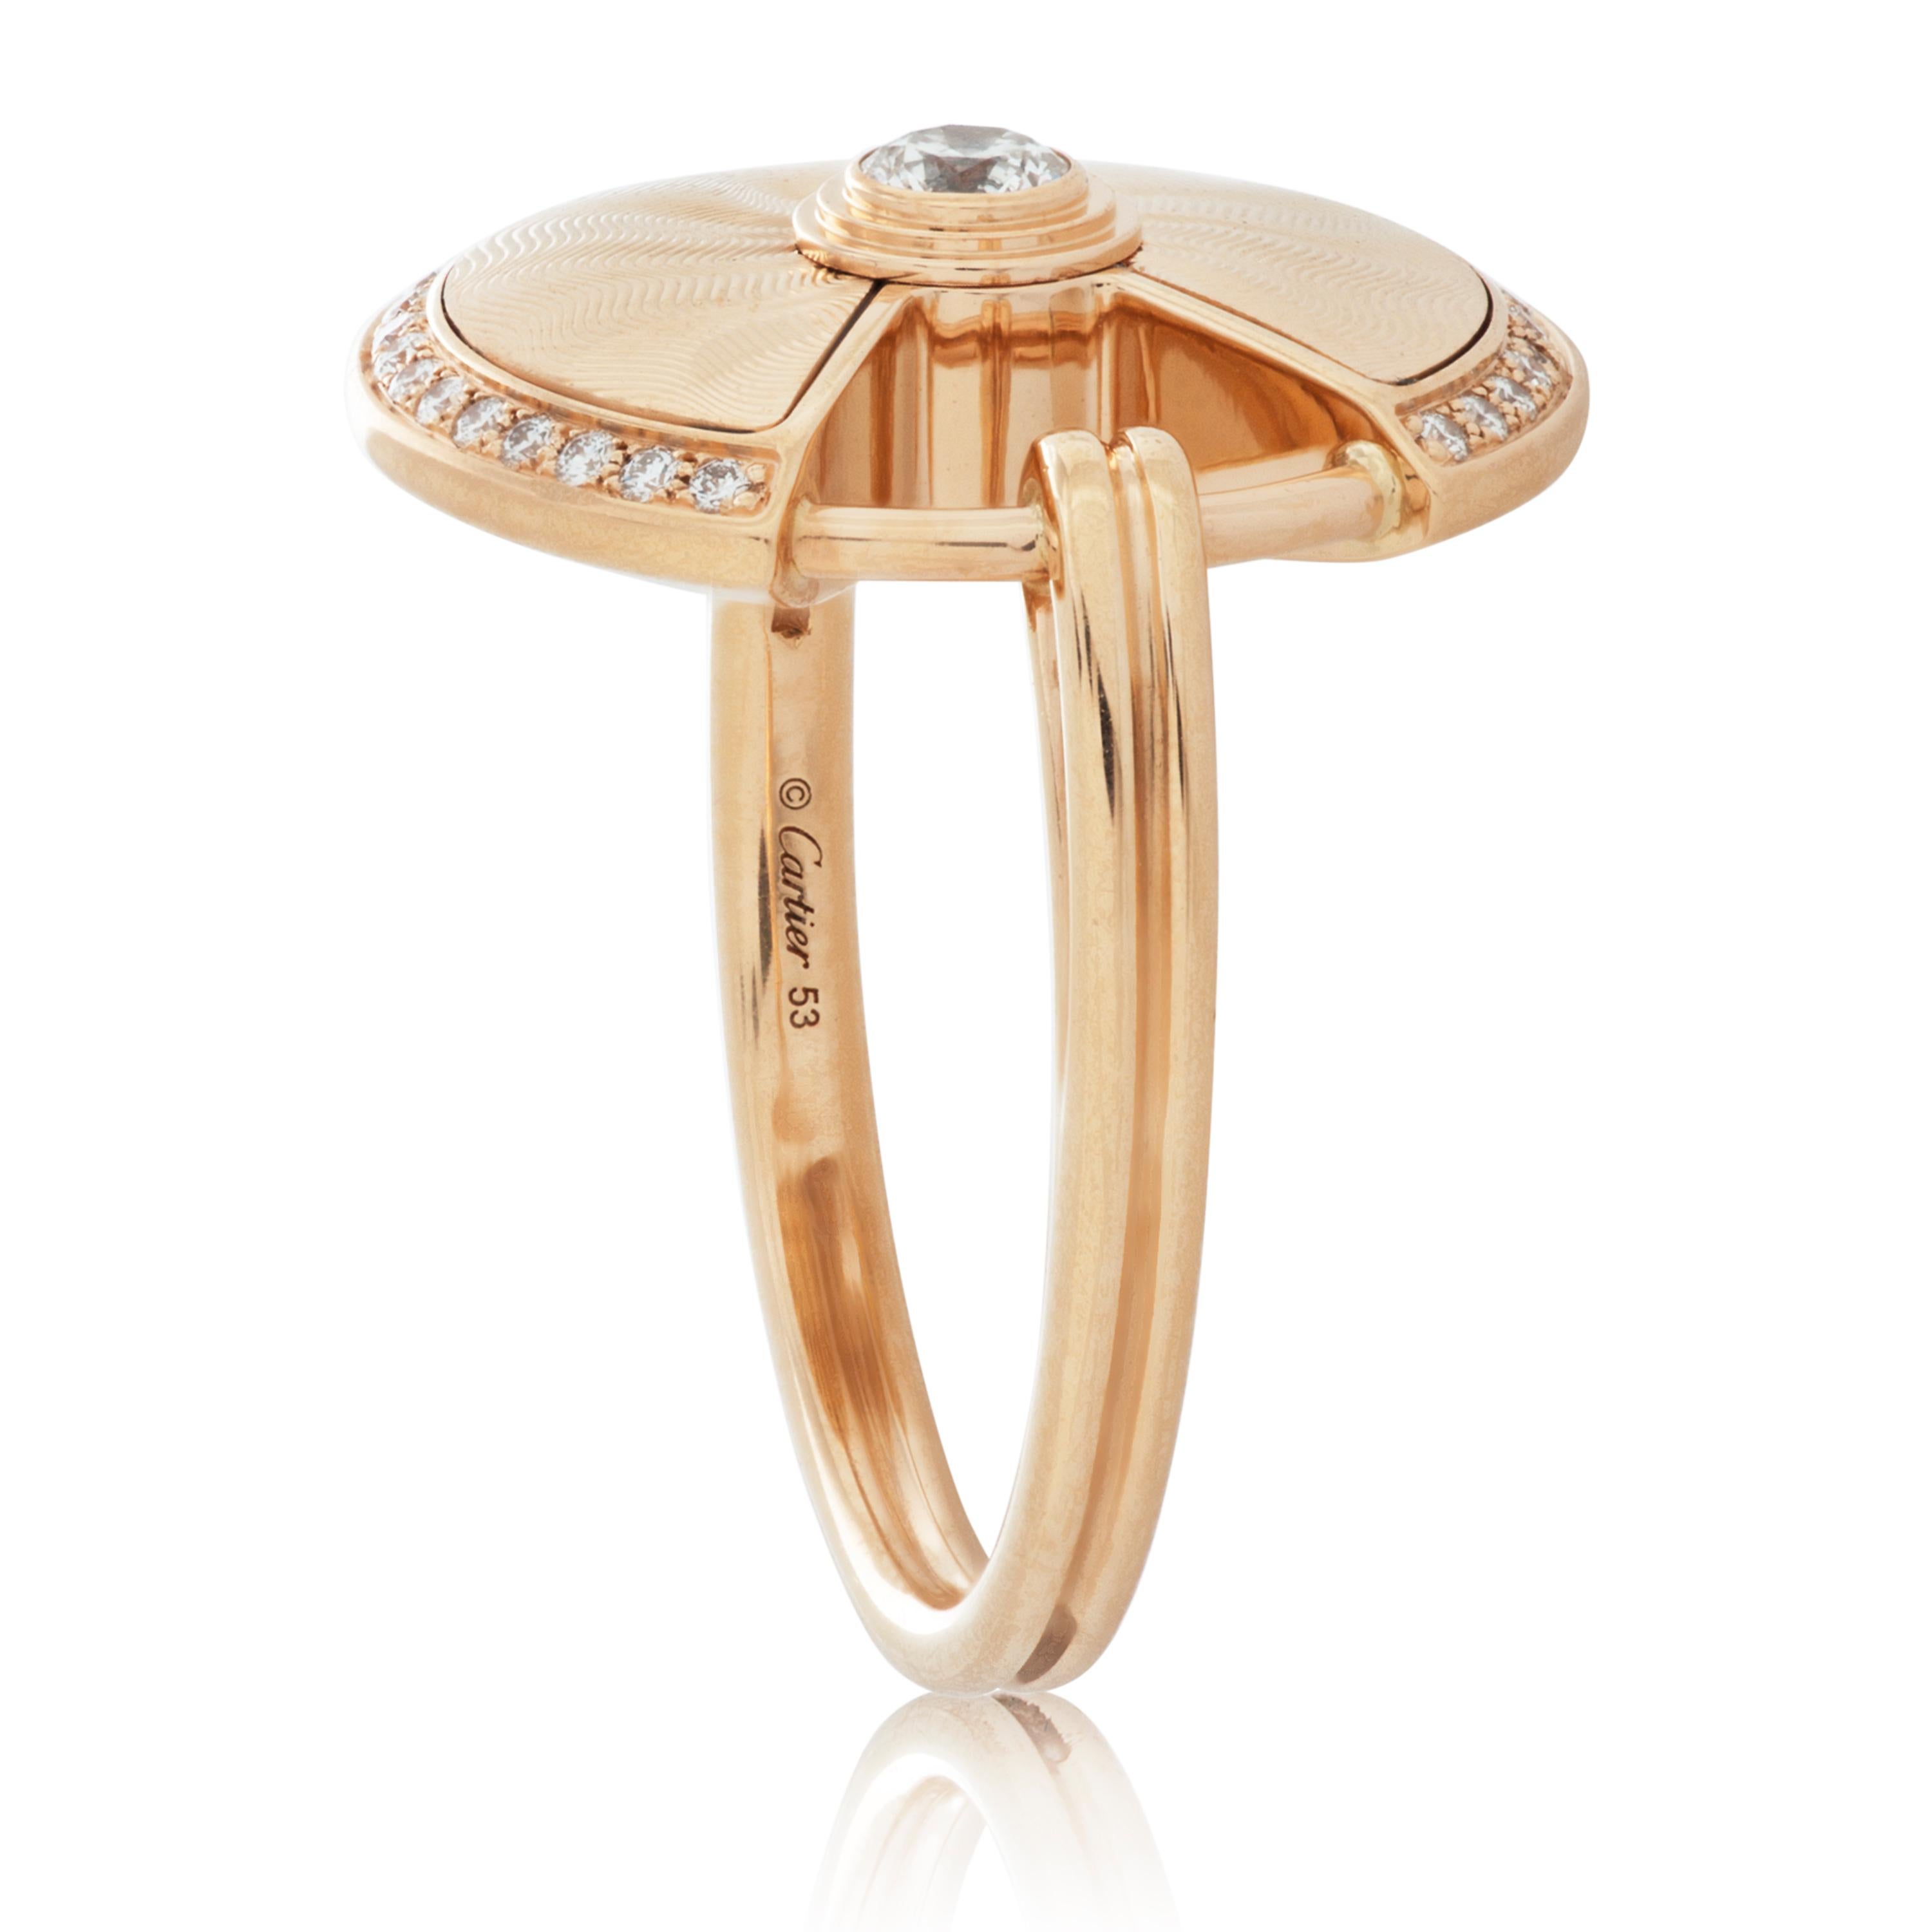 Round Cut Amulette De Cartier Round Diamond Ring in 18K Rose Gold with Cartier Box